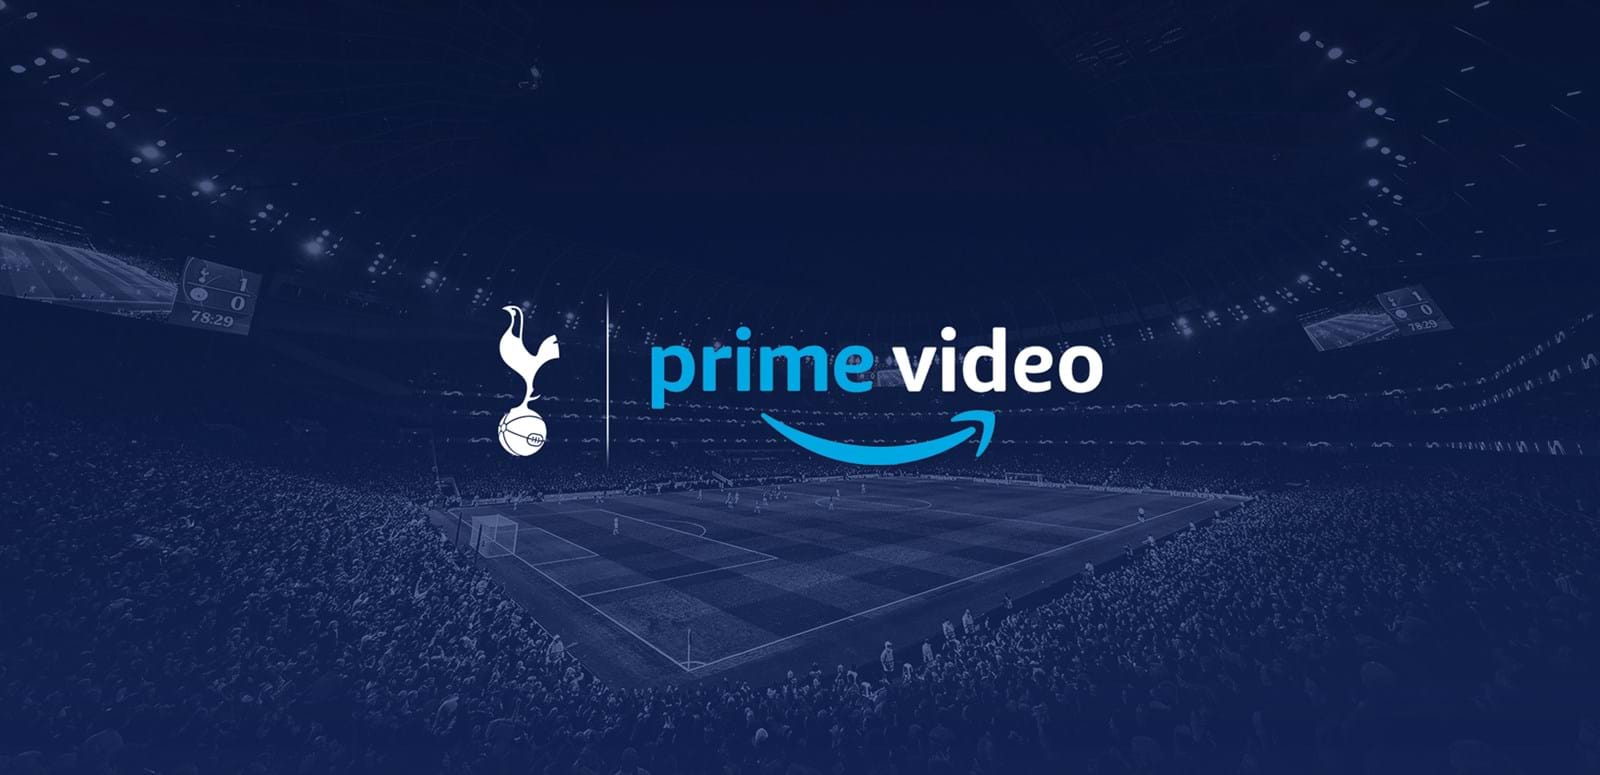 Amazon Primeの All Or Nothing でスパーズのドキュメンタリー化が決定 Spurs Japan